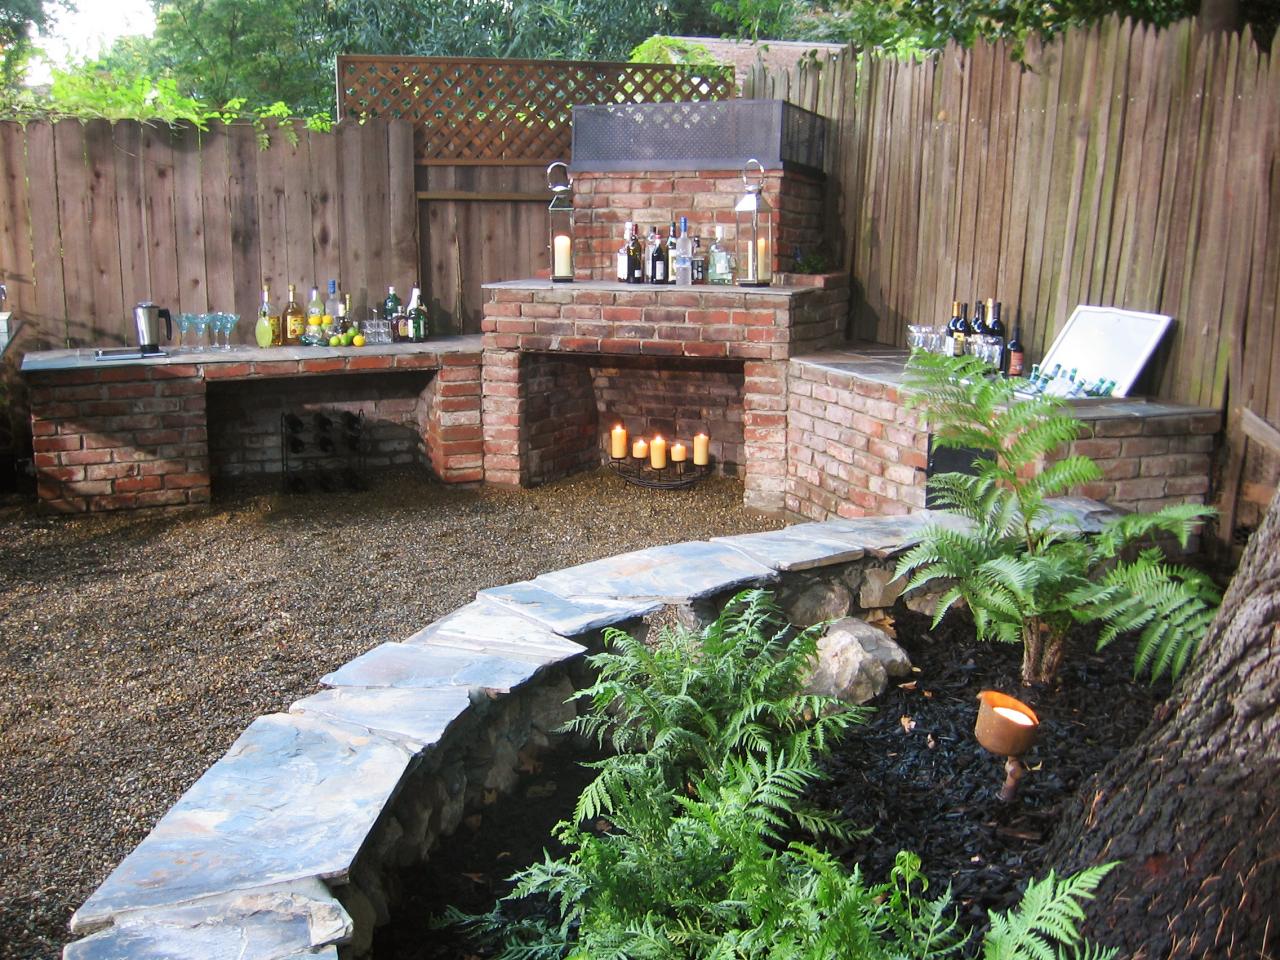 Outdoor Kitchens and Grilling Spaces | DIY Outdoor Spaces ...